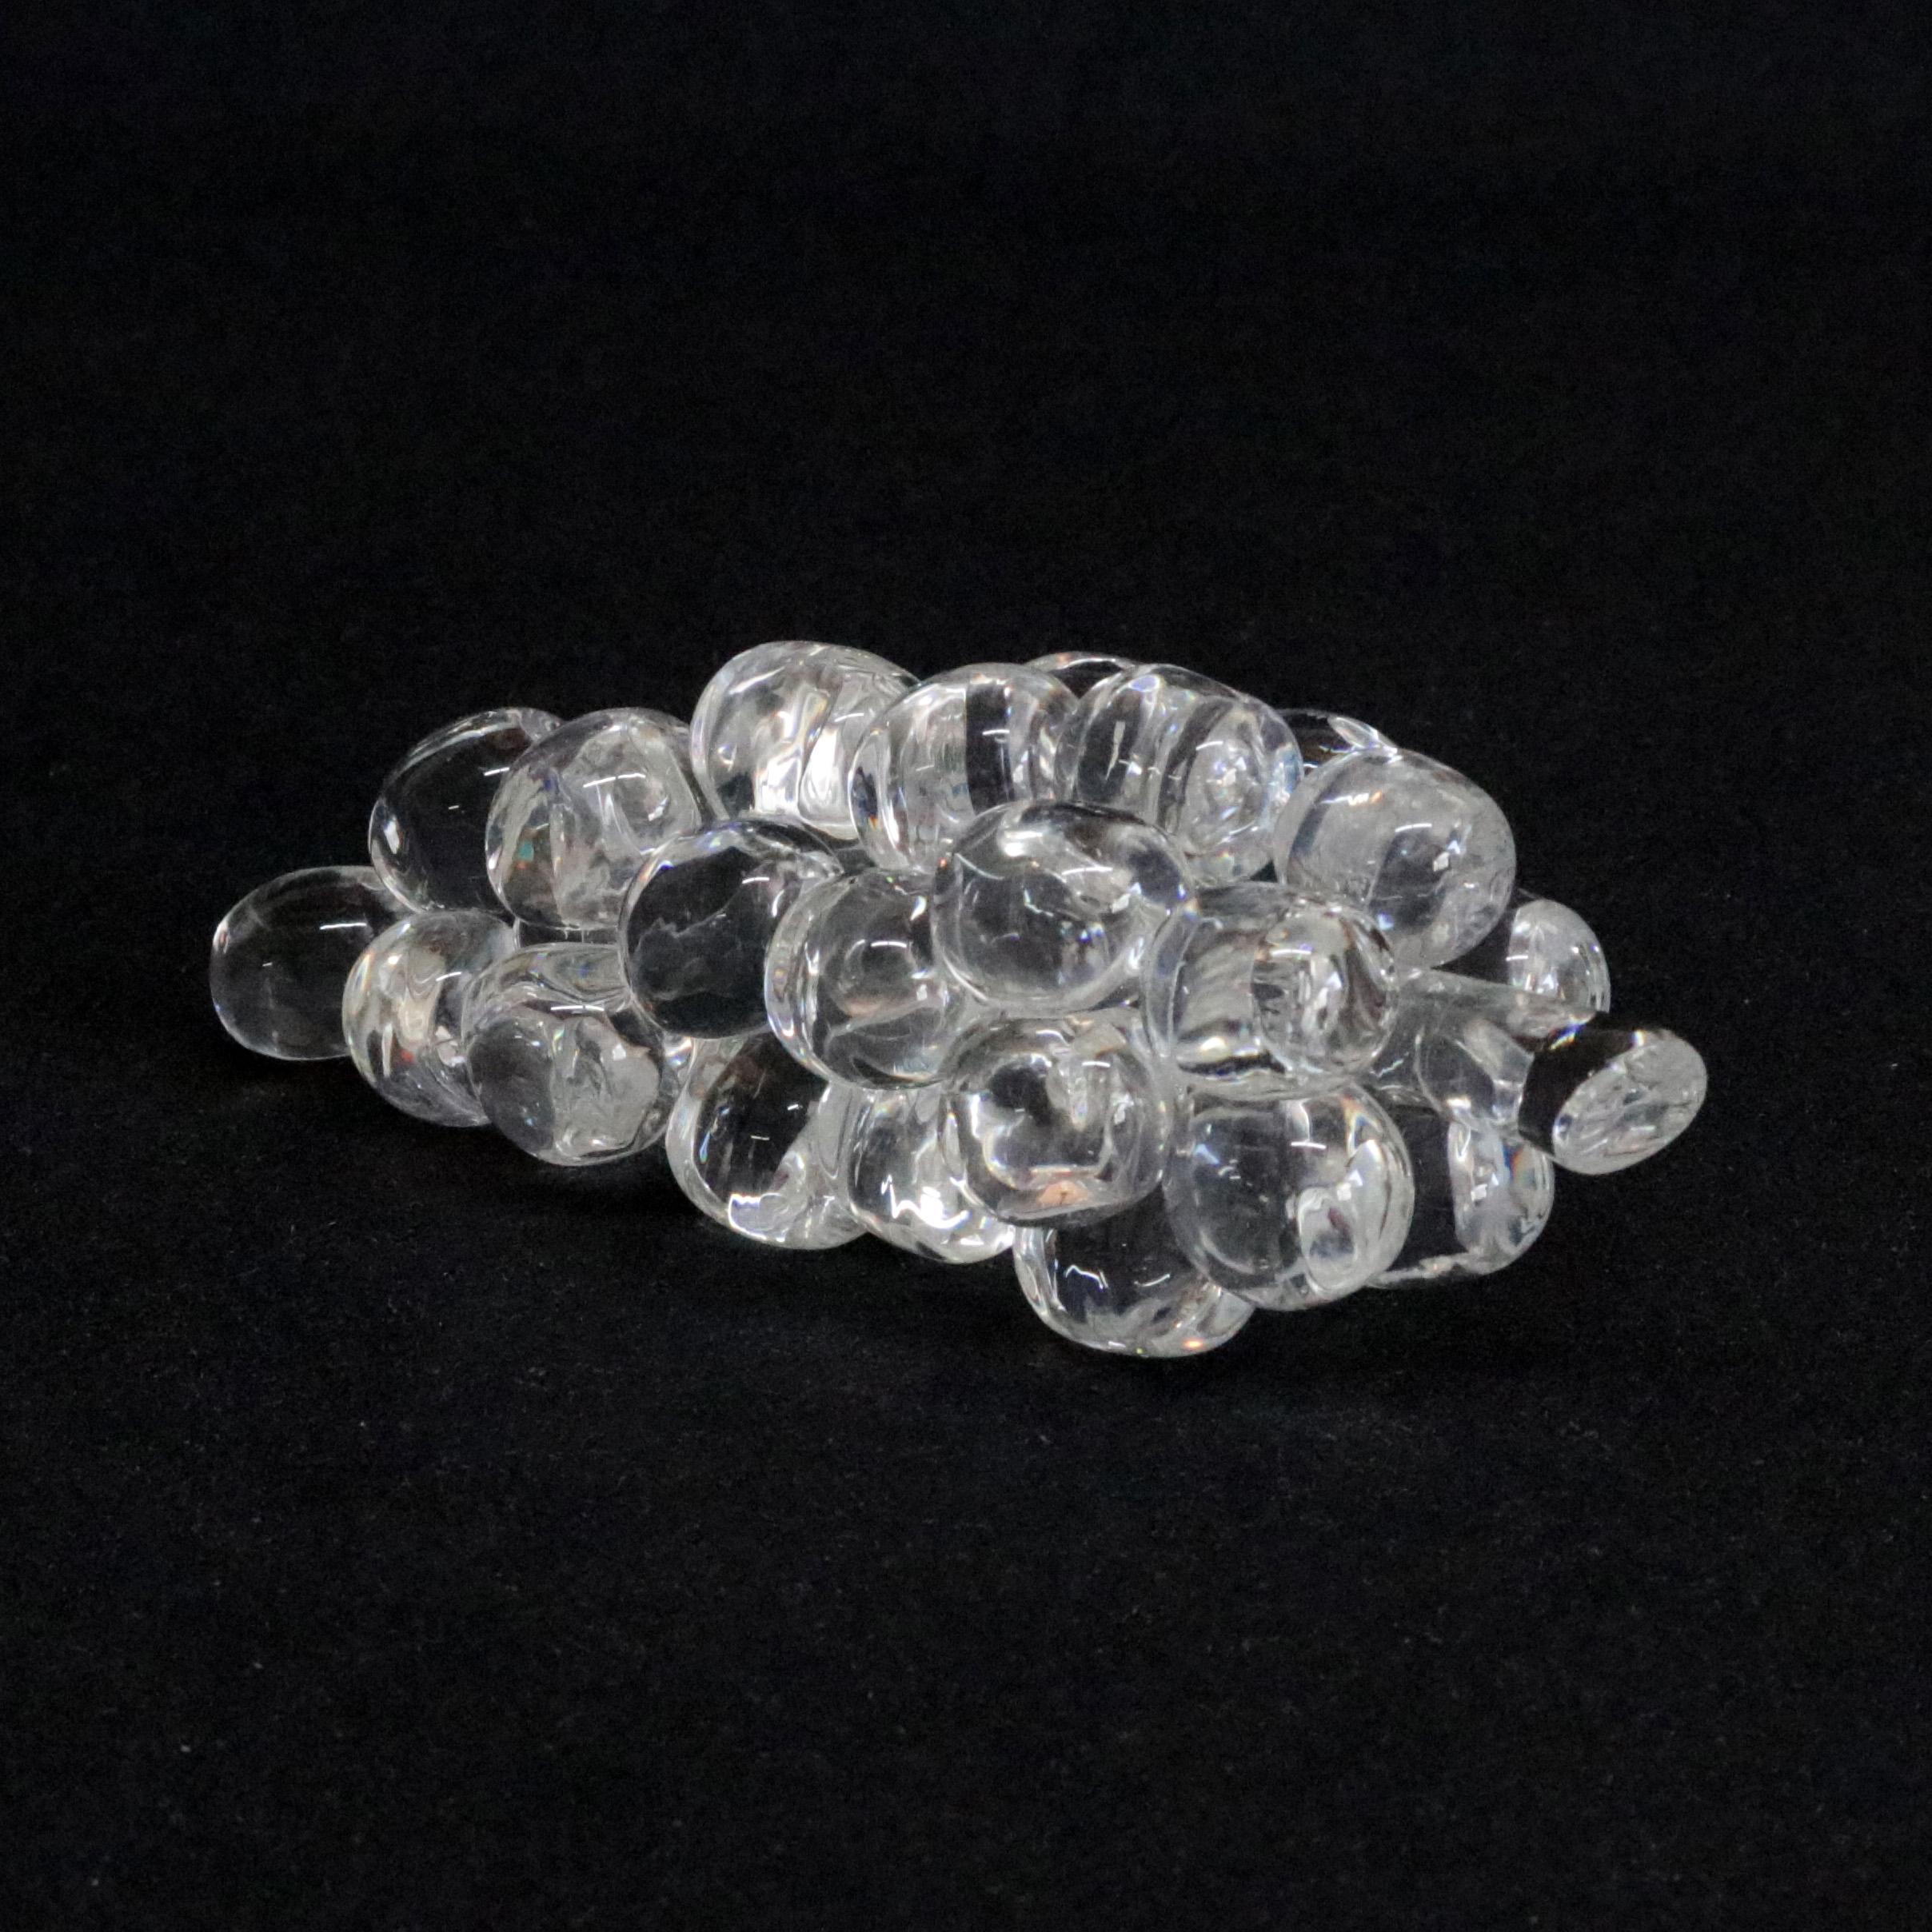 Midcentury Steuben figurative mouth blown crystal fruit sculptural paperweight features colorless art glass in full body form of Grape Cluster designed in the 1940s by Corning Museum of Glass, New York, NY, signed on base, 20th century

Measures -